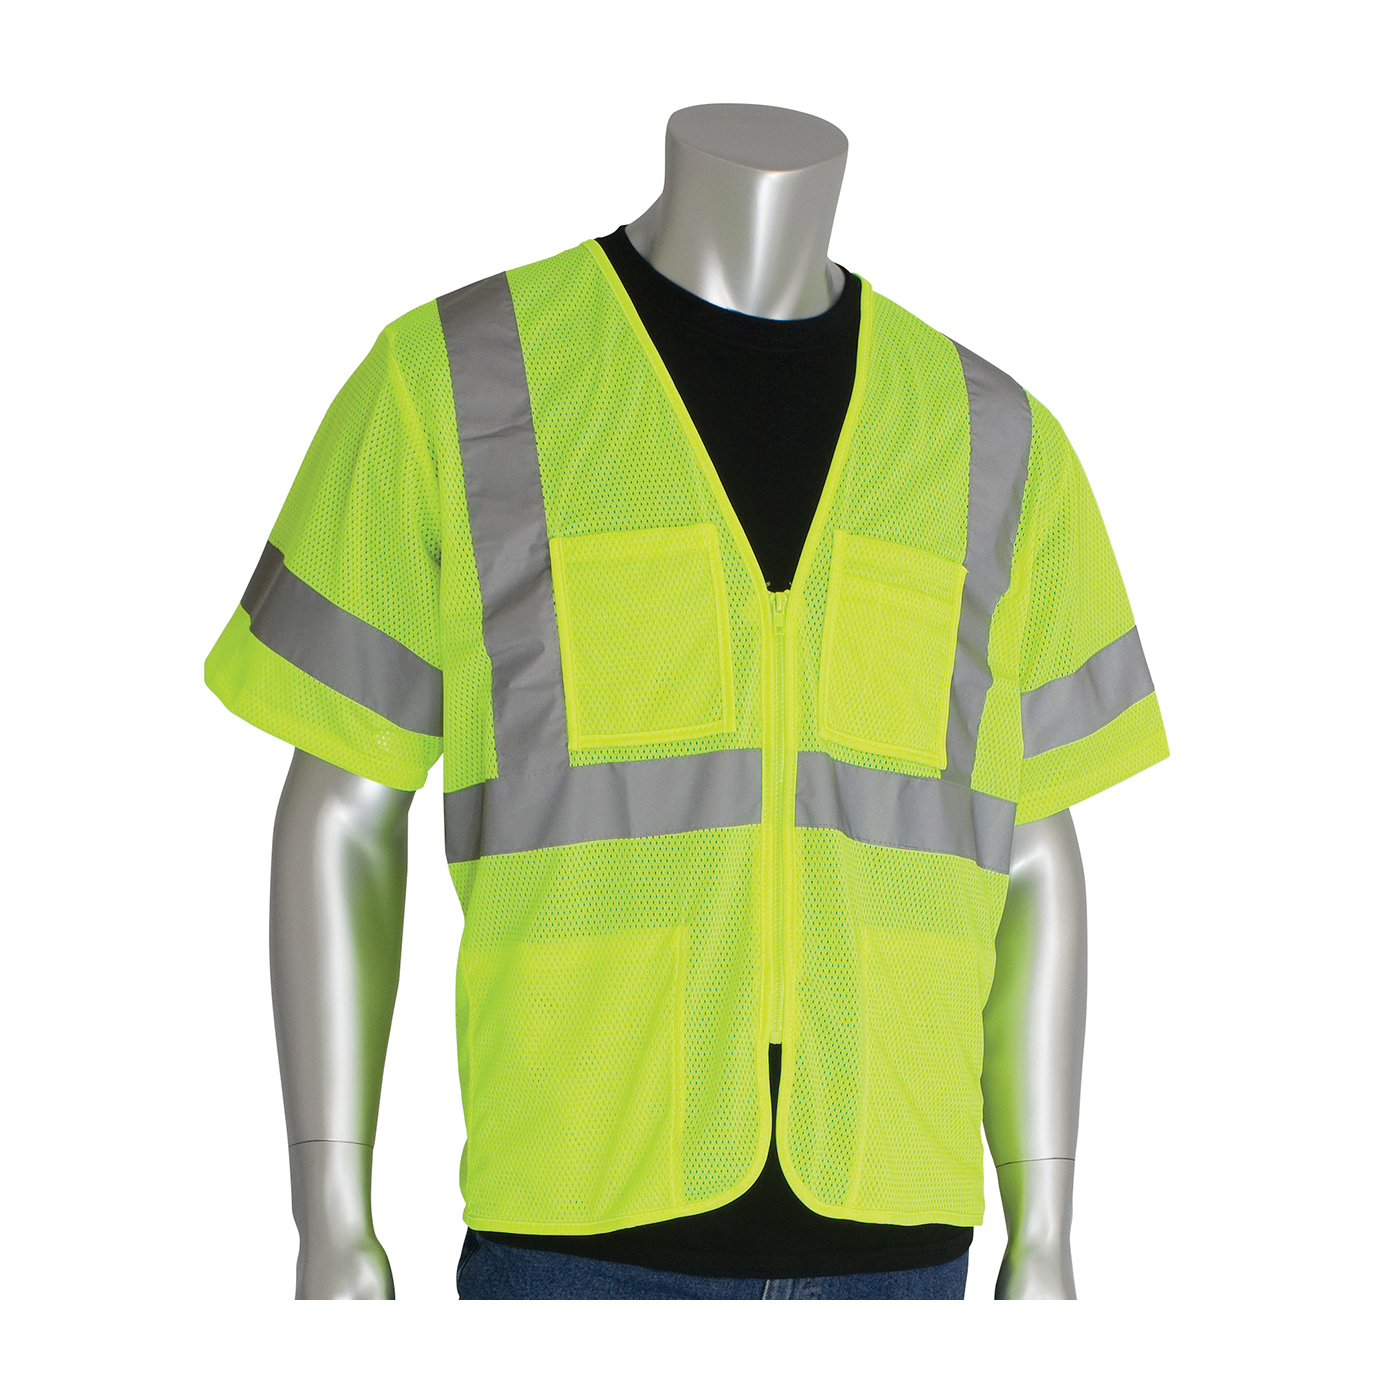 PIP® 303-MVGZ4P-LY/S Safety Vest, S, Hi-Viz Lime Yellow, Polyester Mesh, Zipper Closure, 4 Pockets, ANSI Class: Class 3, Specifications Met: ANSI 107 Type R